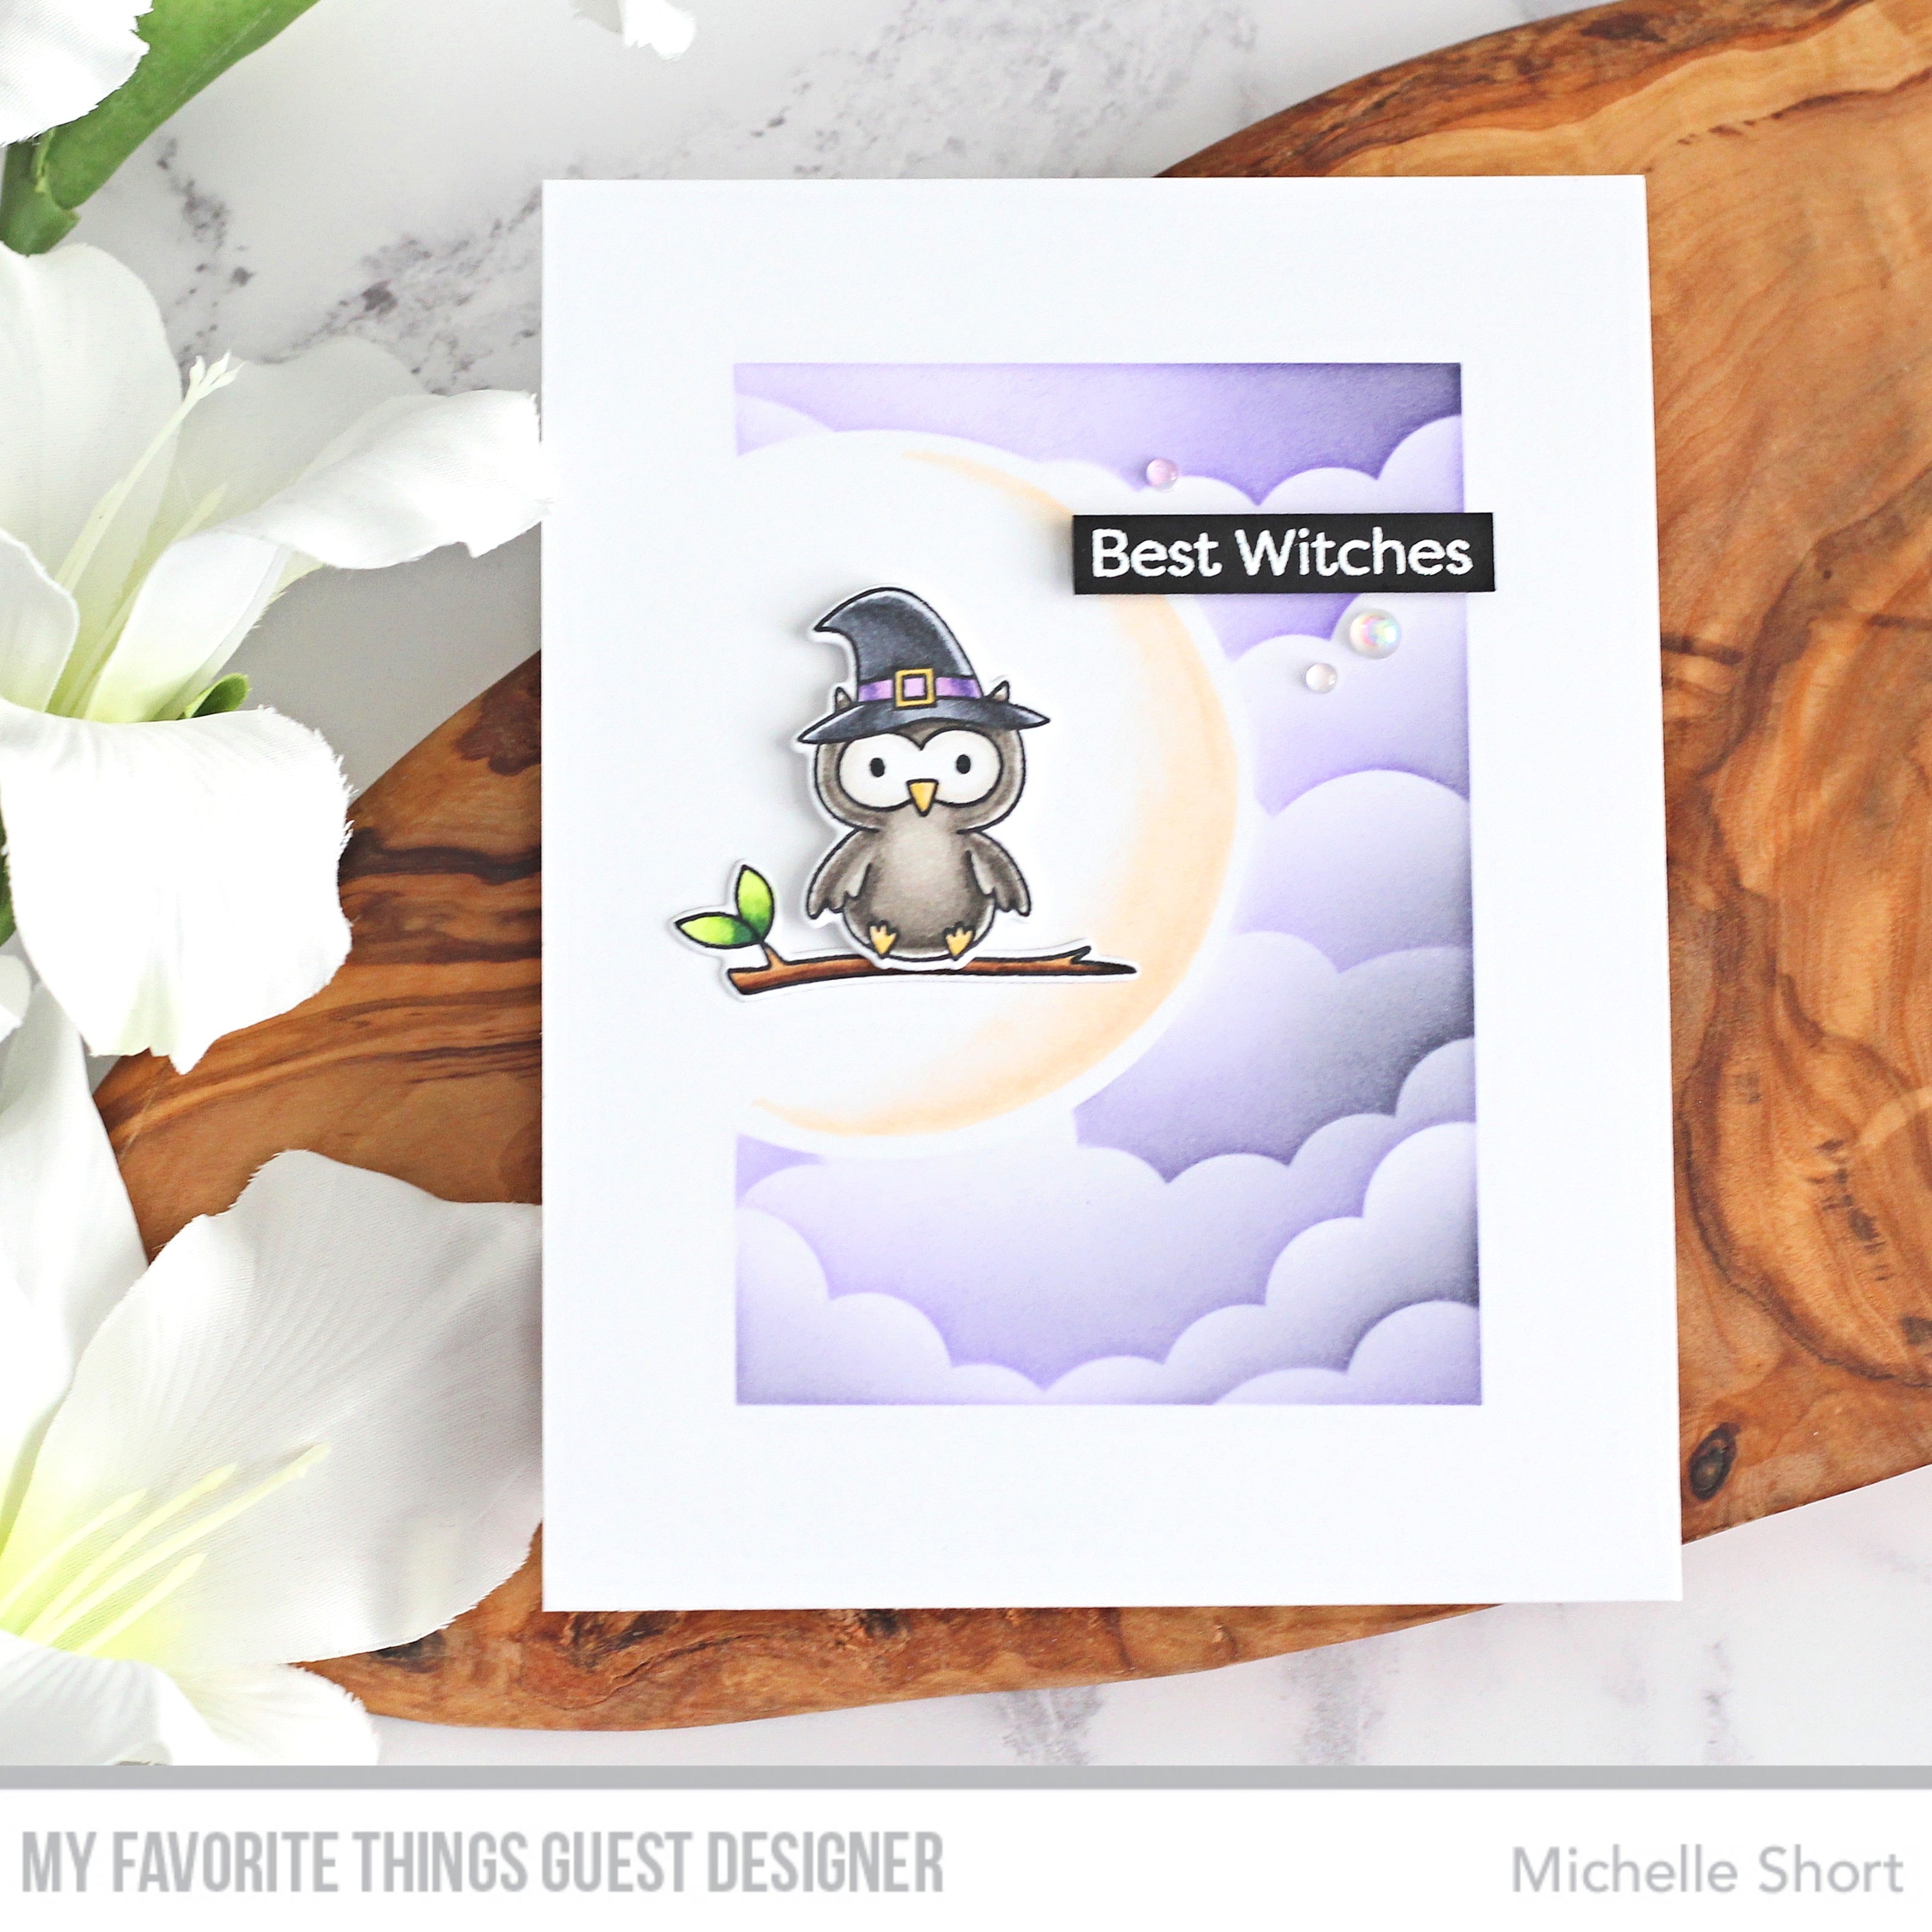 handmade card from MIchelle Short featuring products from My Favorite Things #mftstamps